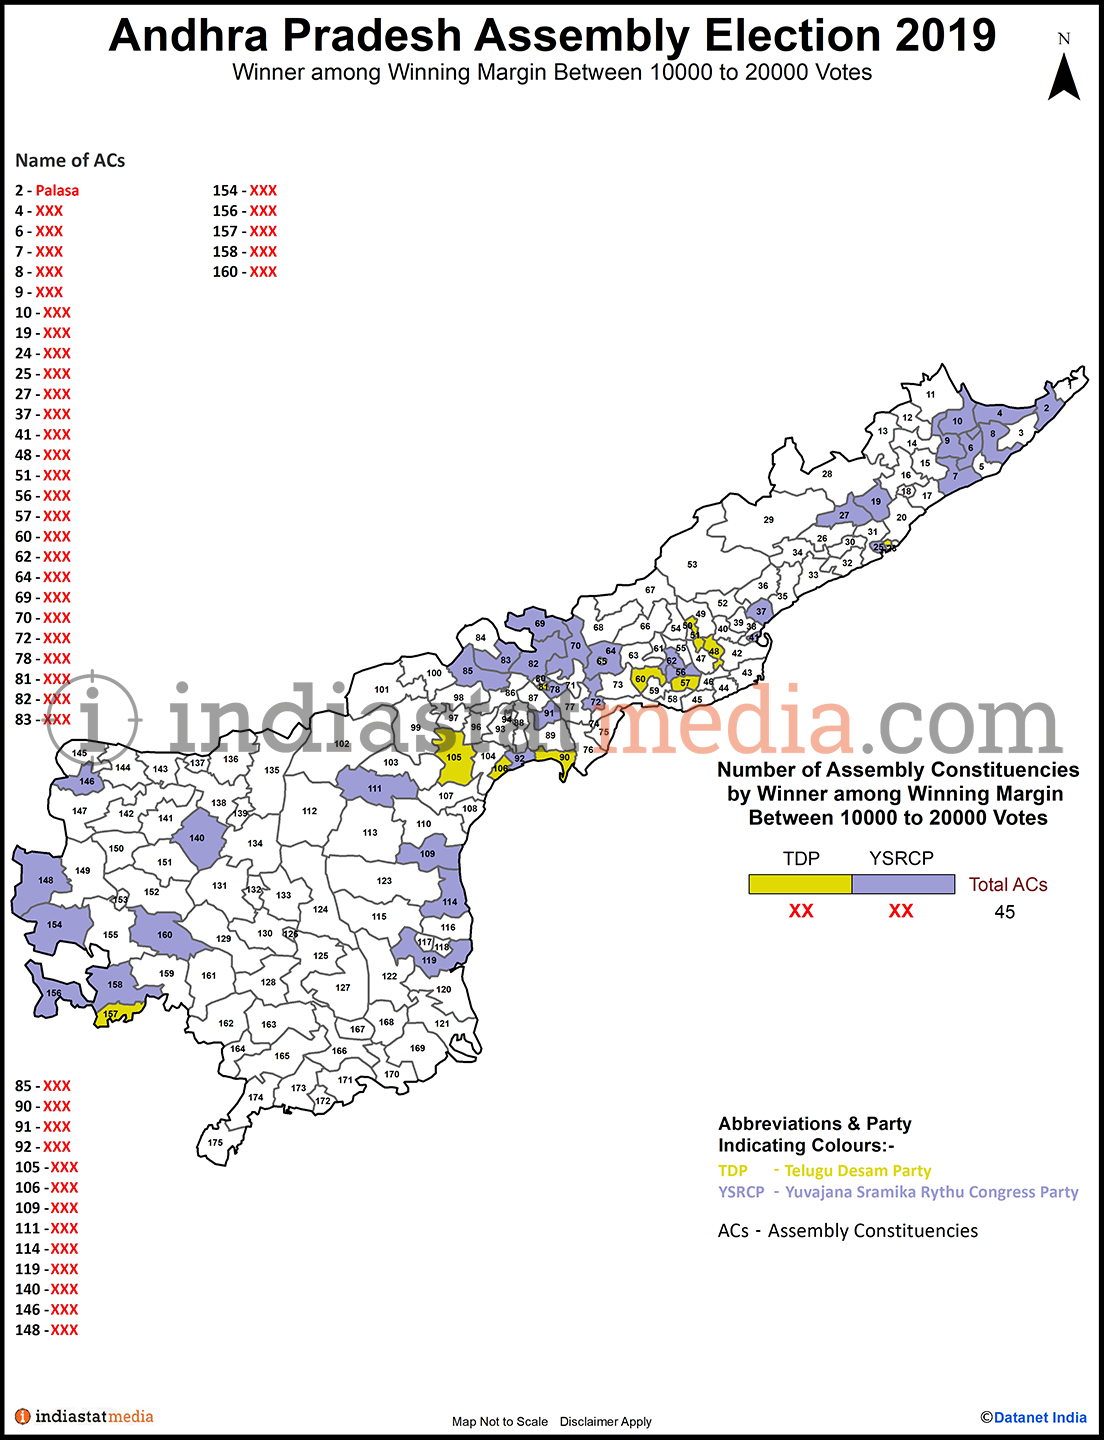 Winner among Winning Margin Between 10000 to 20000 Votes in Andhra Pradesh (Assembly Election - 2019)